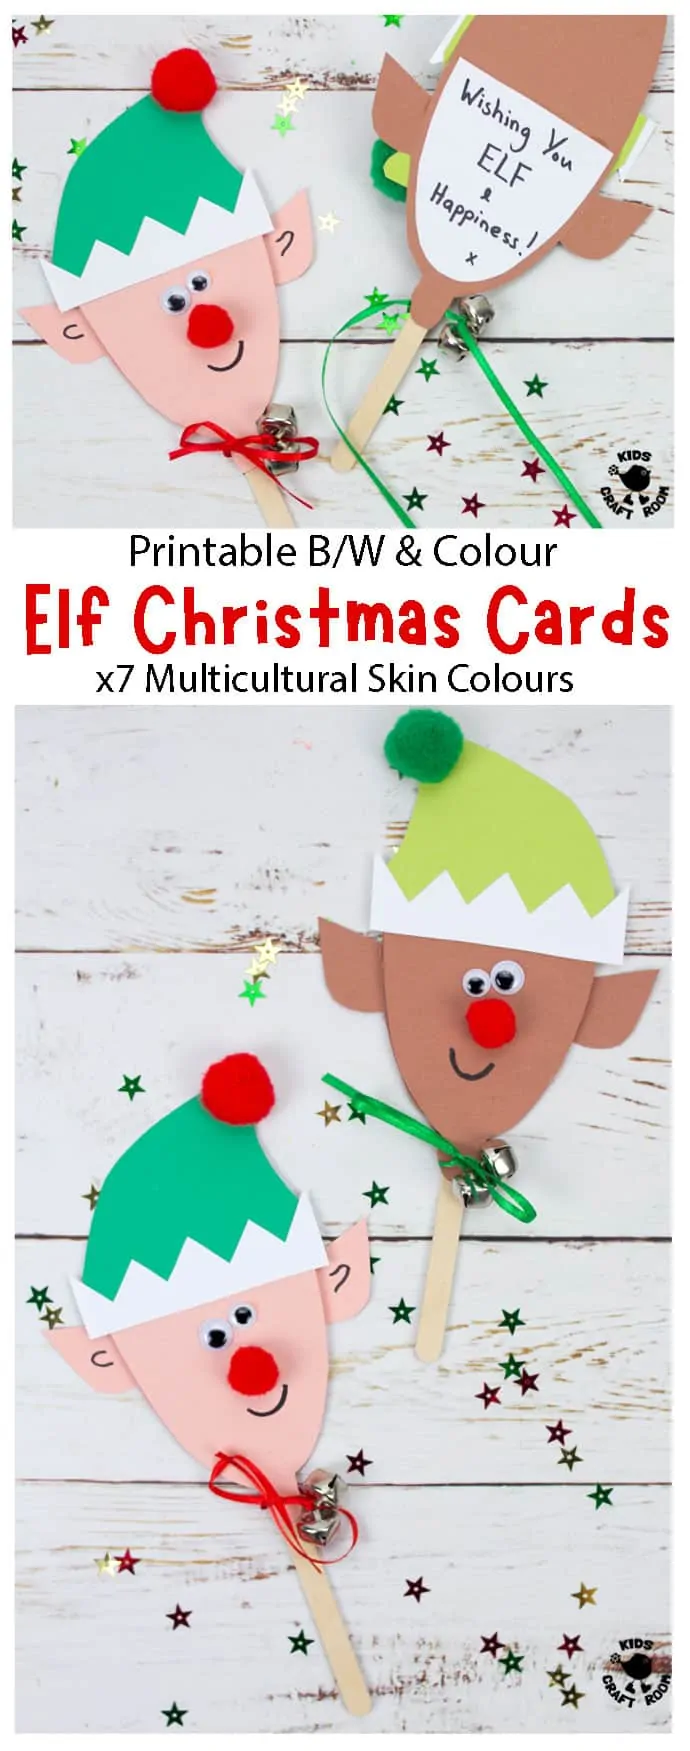 Puppet Elf Christmas Cards pin image 1